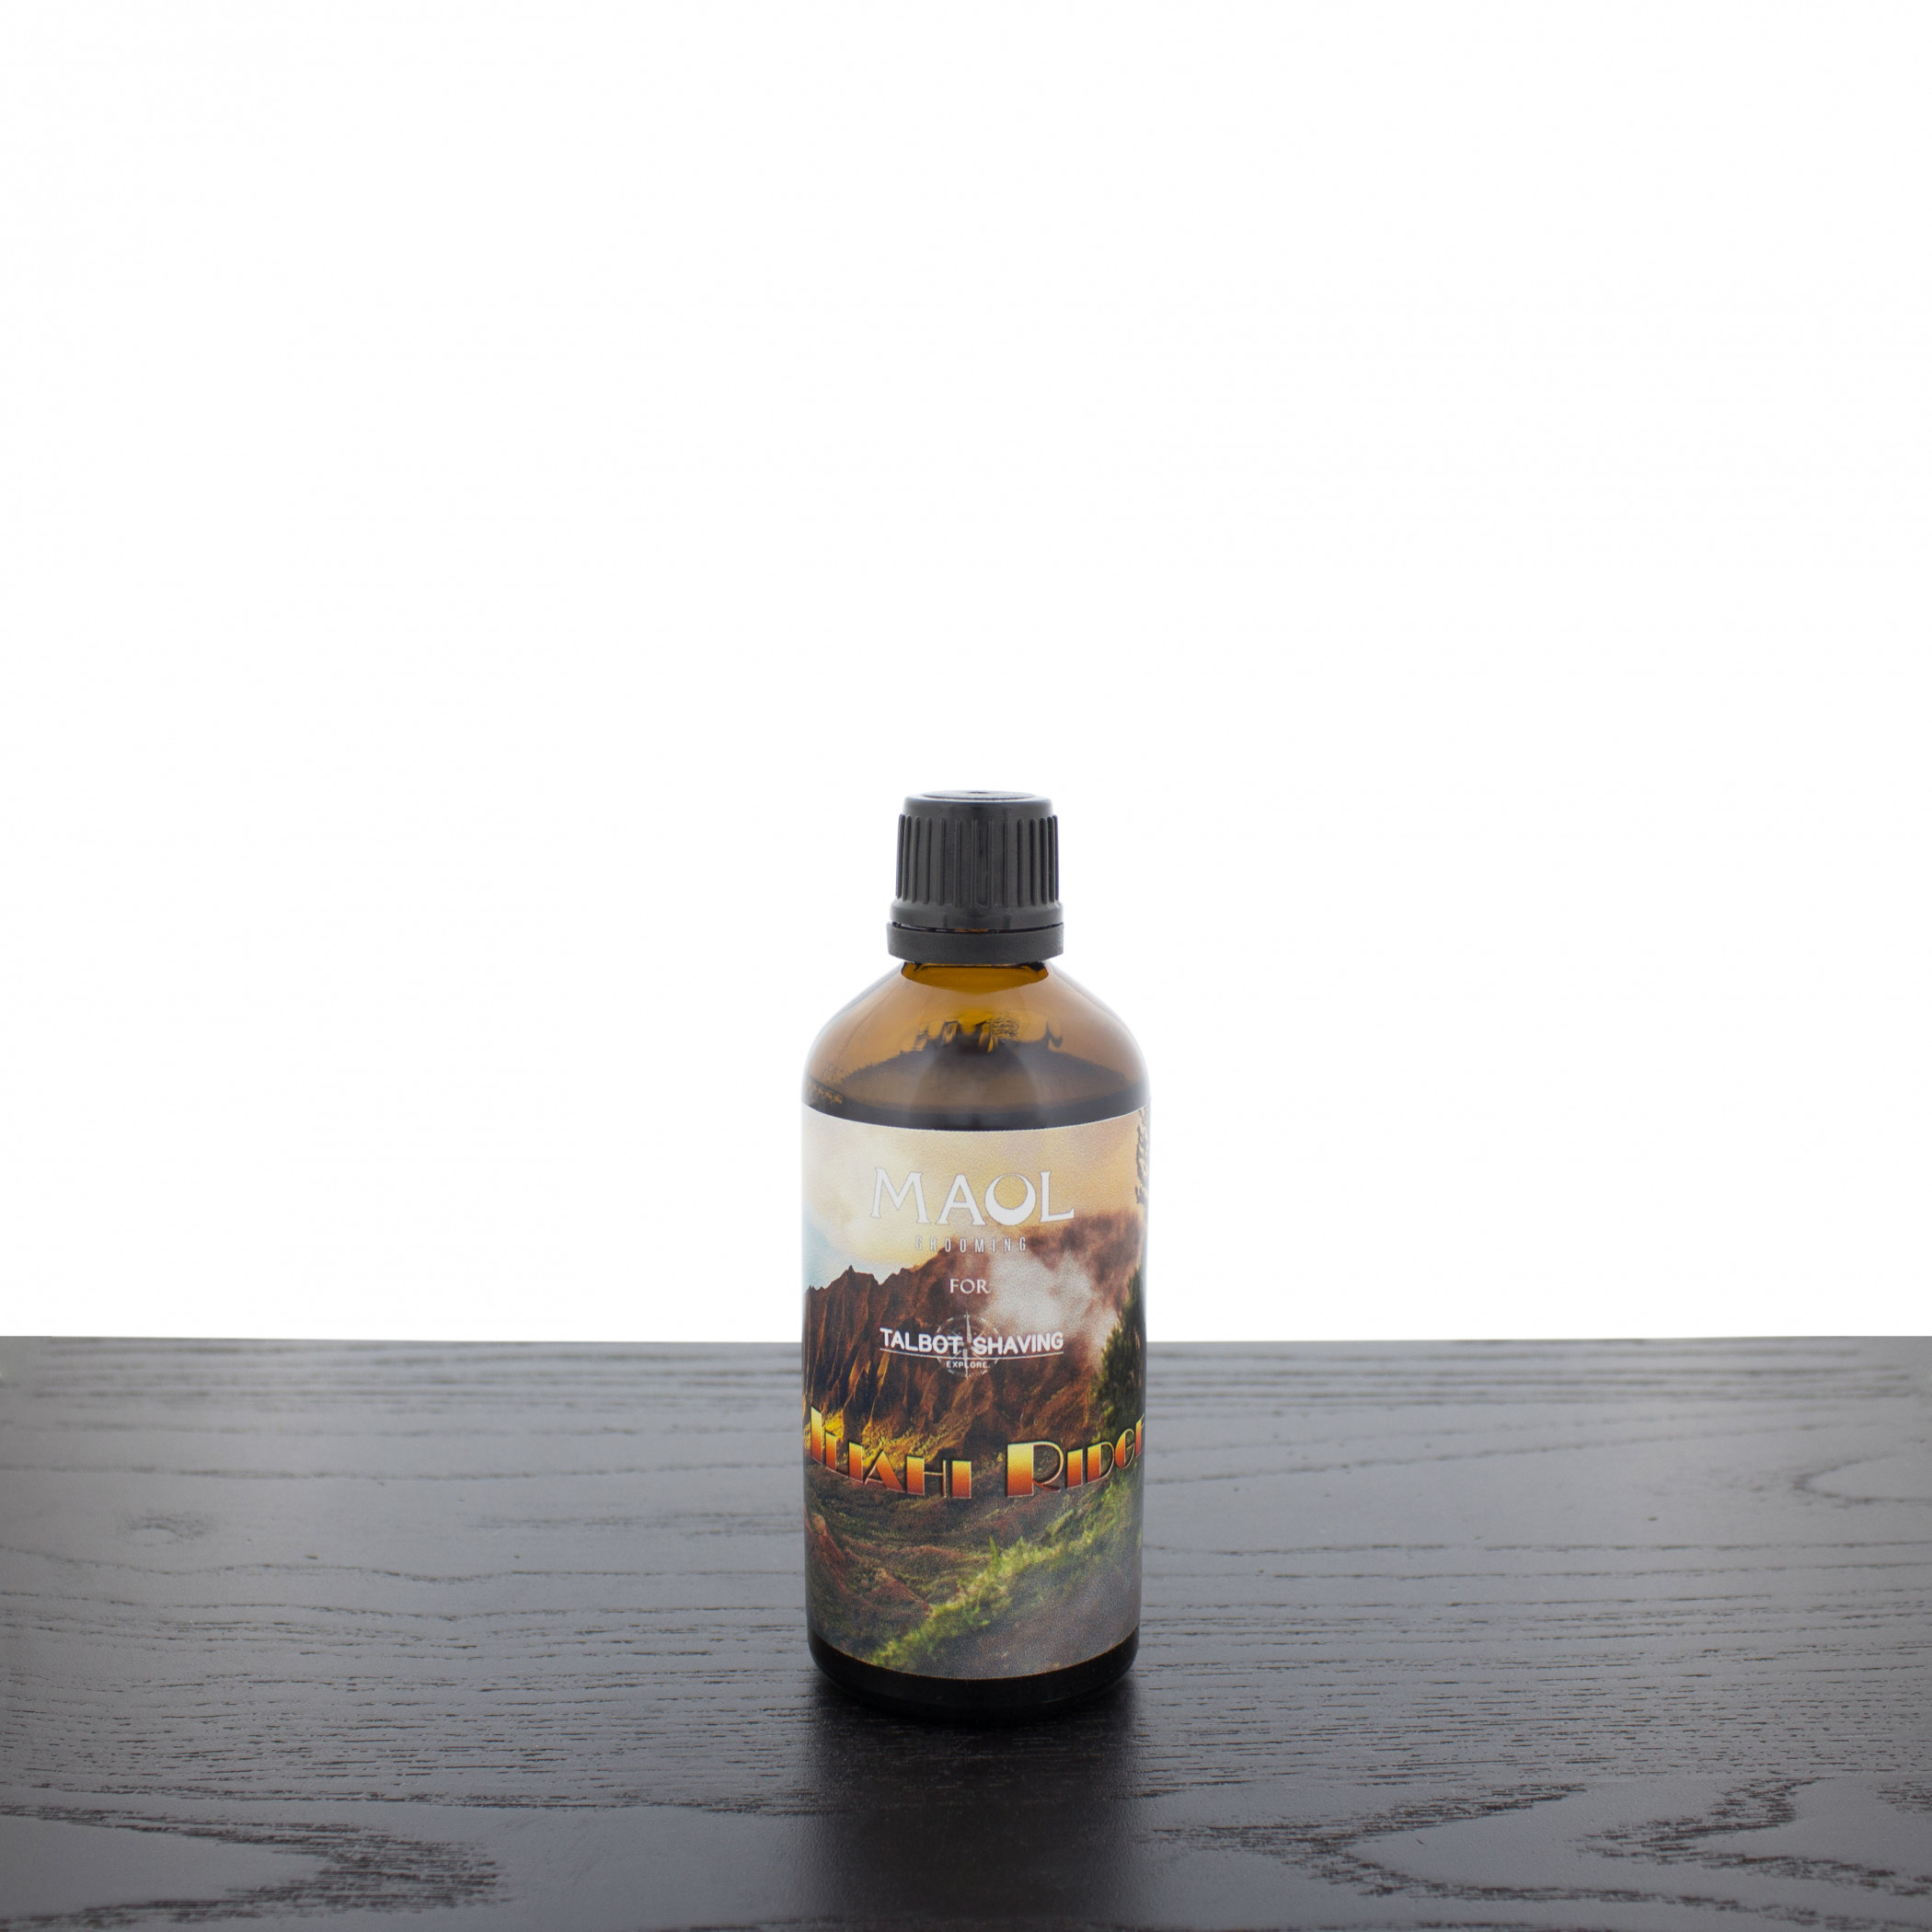 Product image 0 for Talbot Shaving After Shave Splash, Iliahi Ridge by Maol Grooming